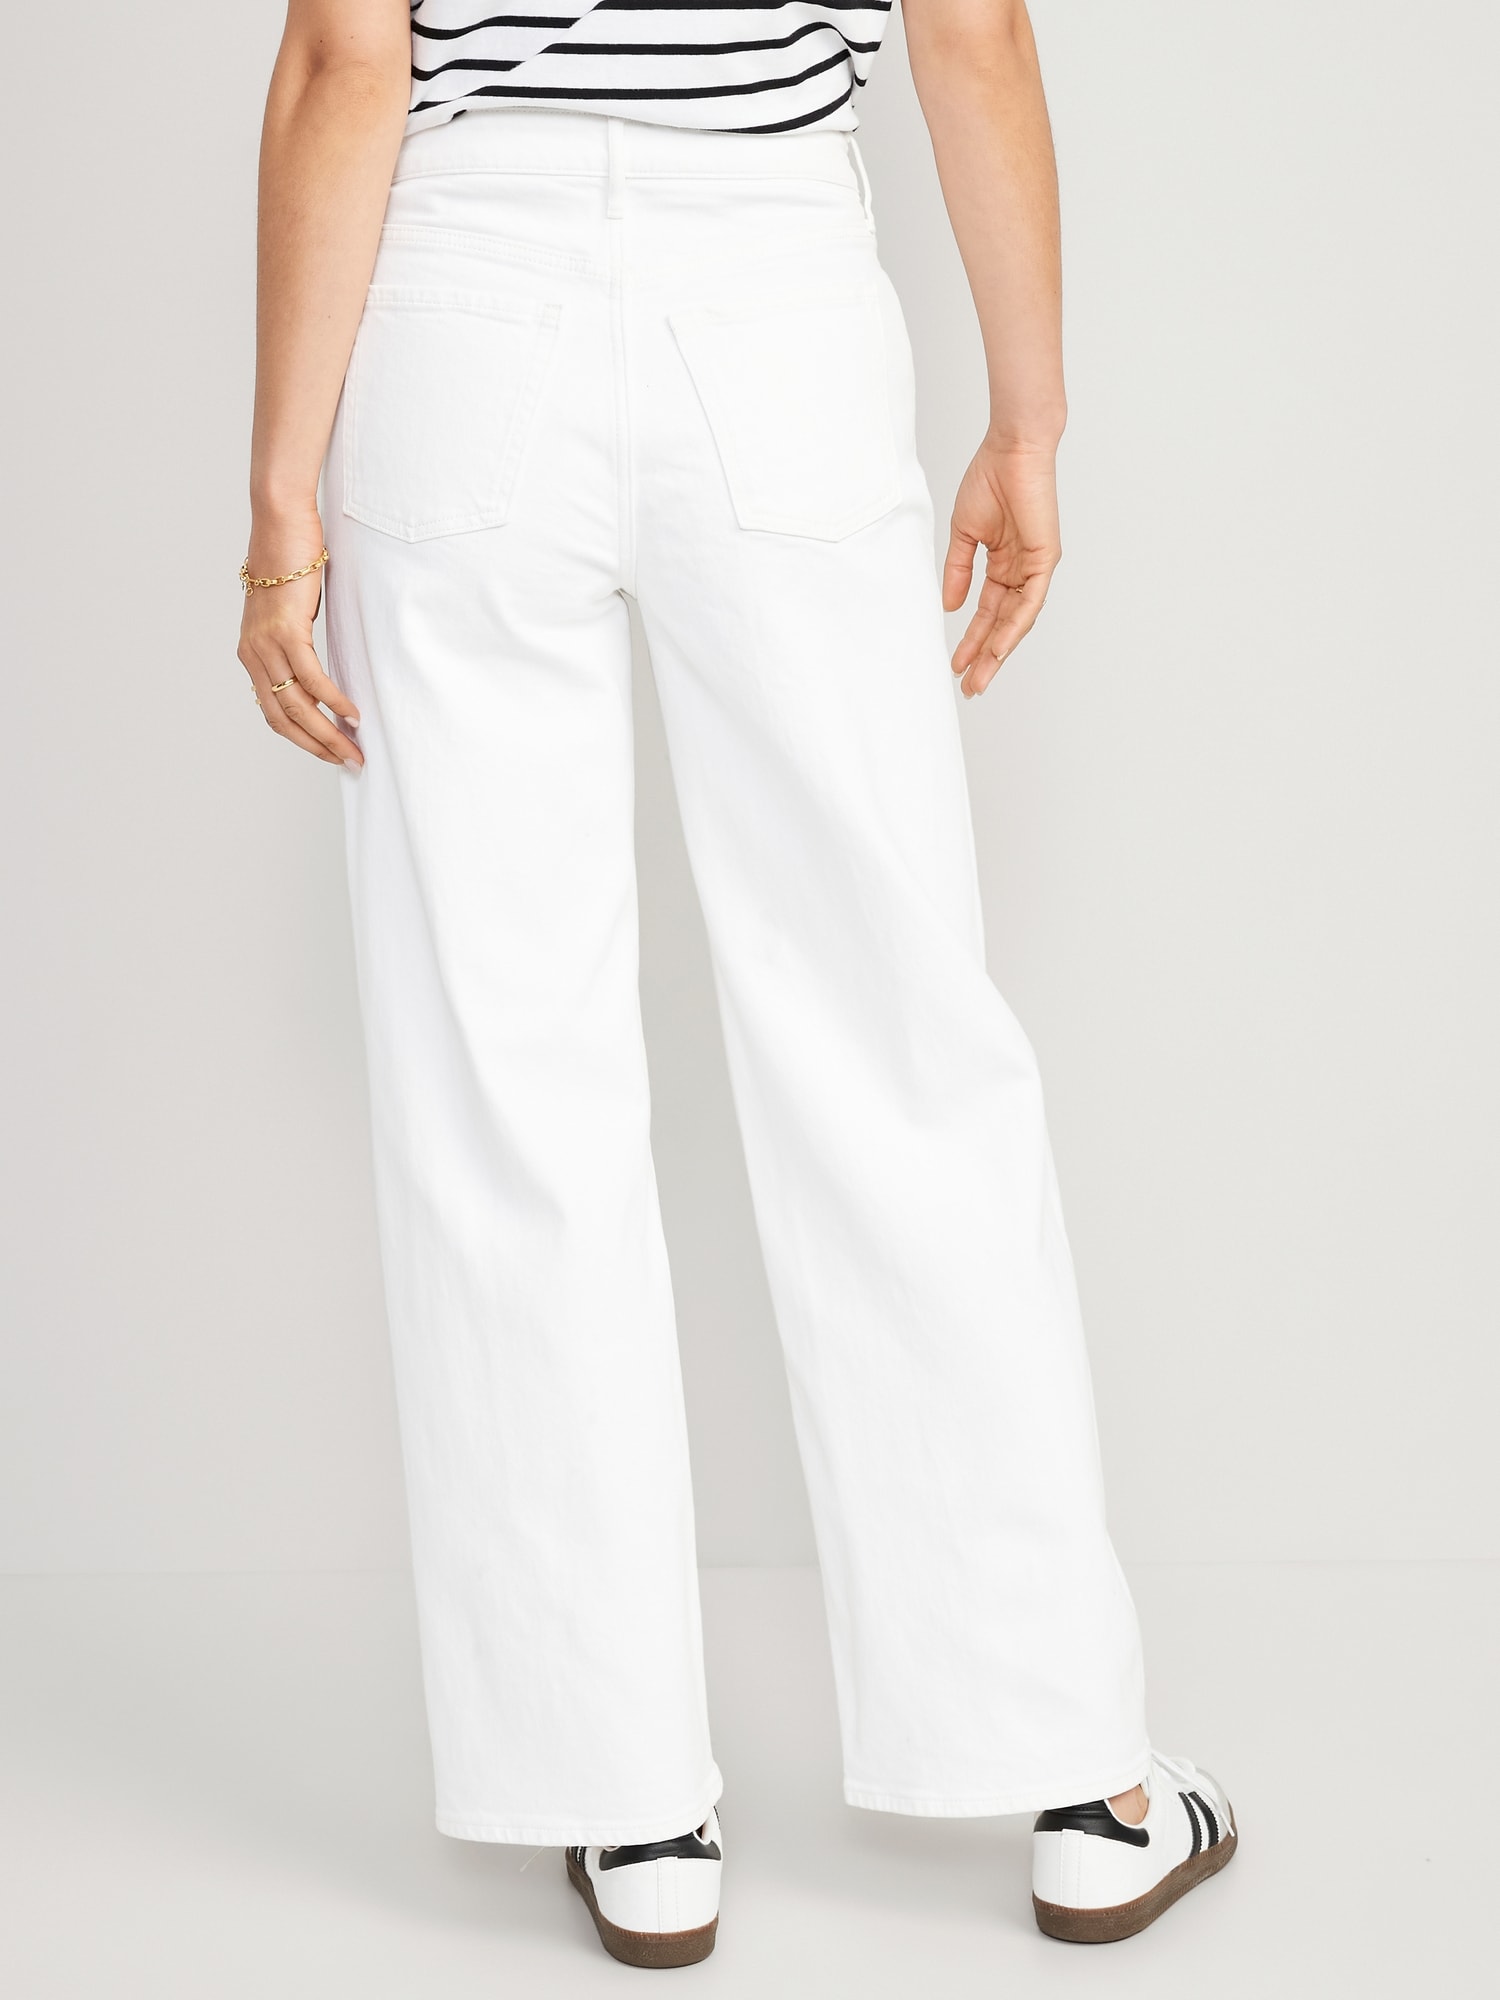 Topshop wide leg jeans in off white